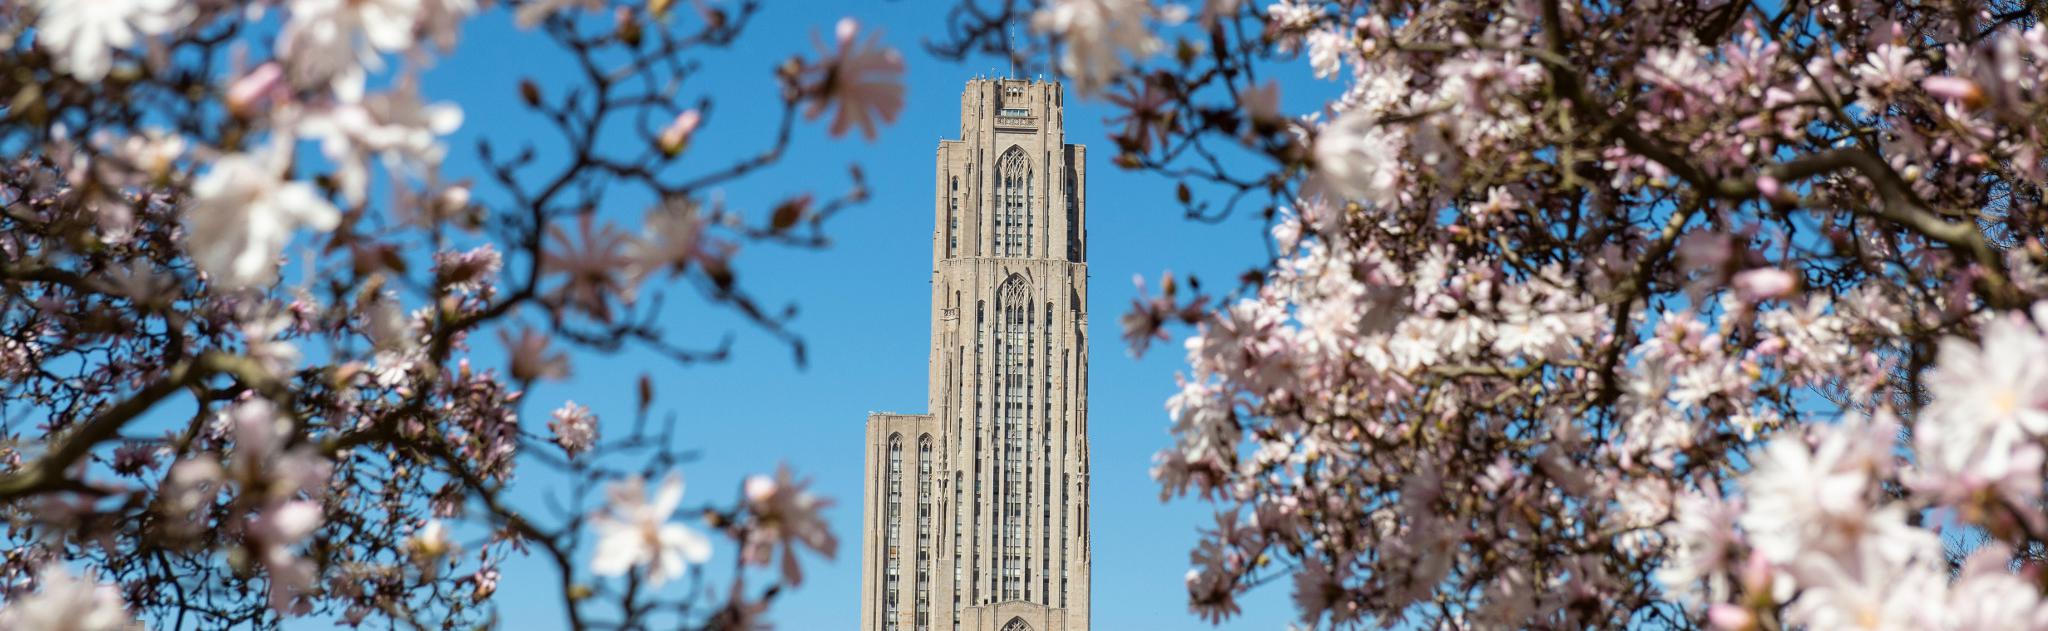 Cathedral of Learning and spring blossoms